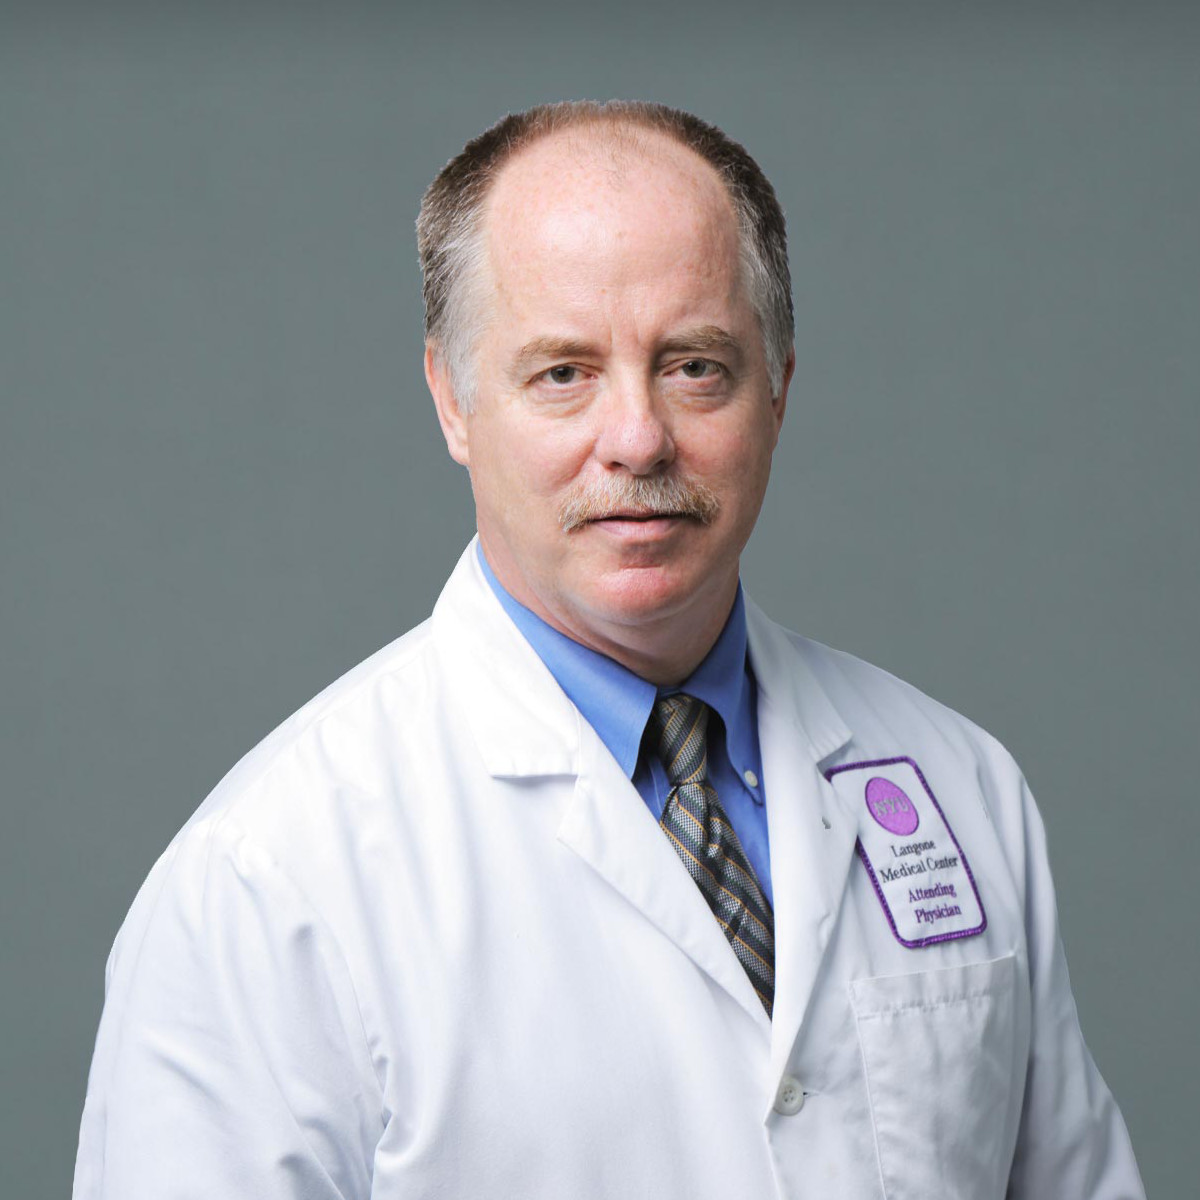 William J. Cole,MD. Cardiology